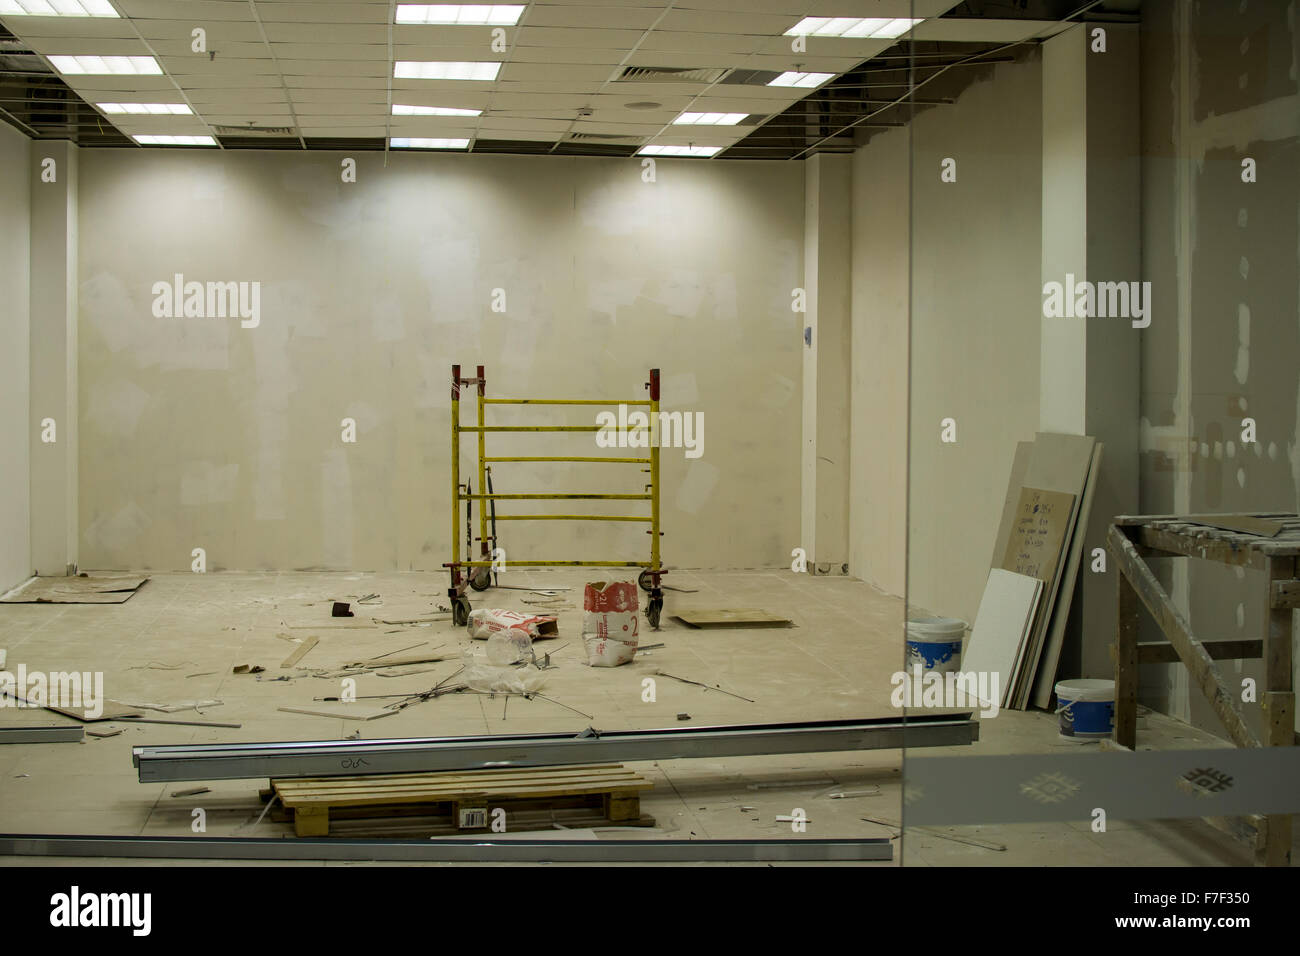 Renovation and construction work on an empty shop unit to prepare the building interior for new Stock Photo